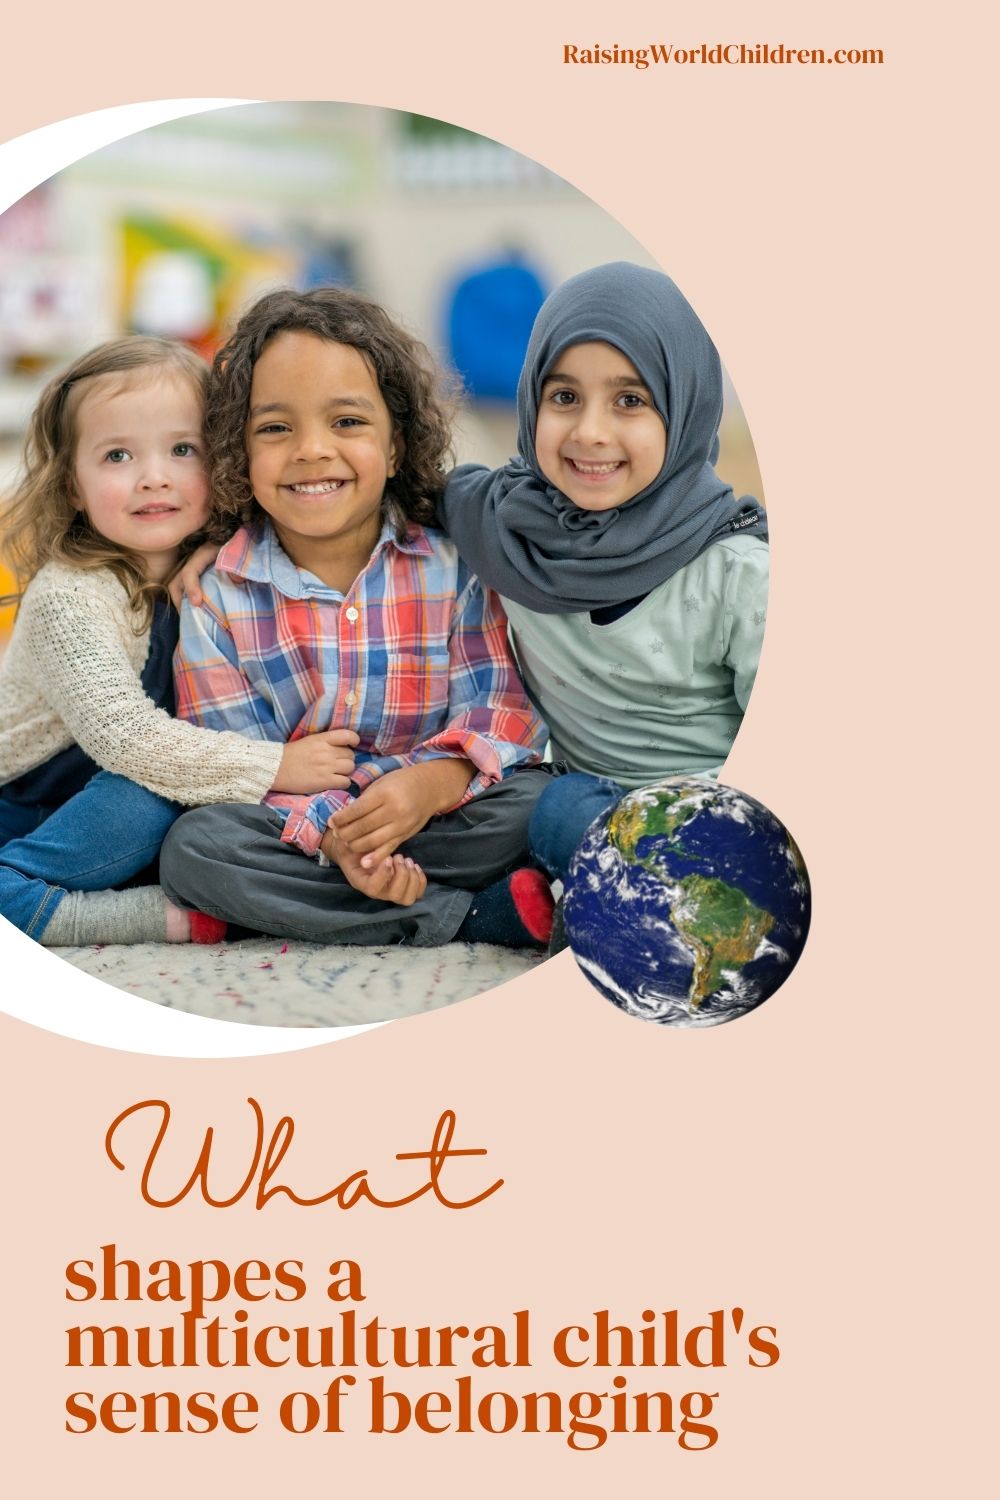 What Shapes a multicultural child's sense of belonging